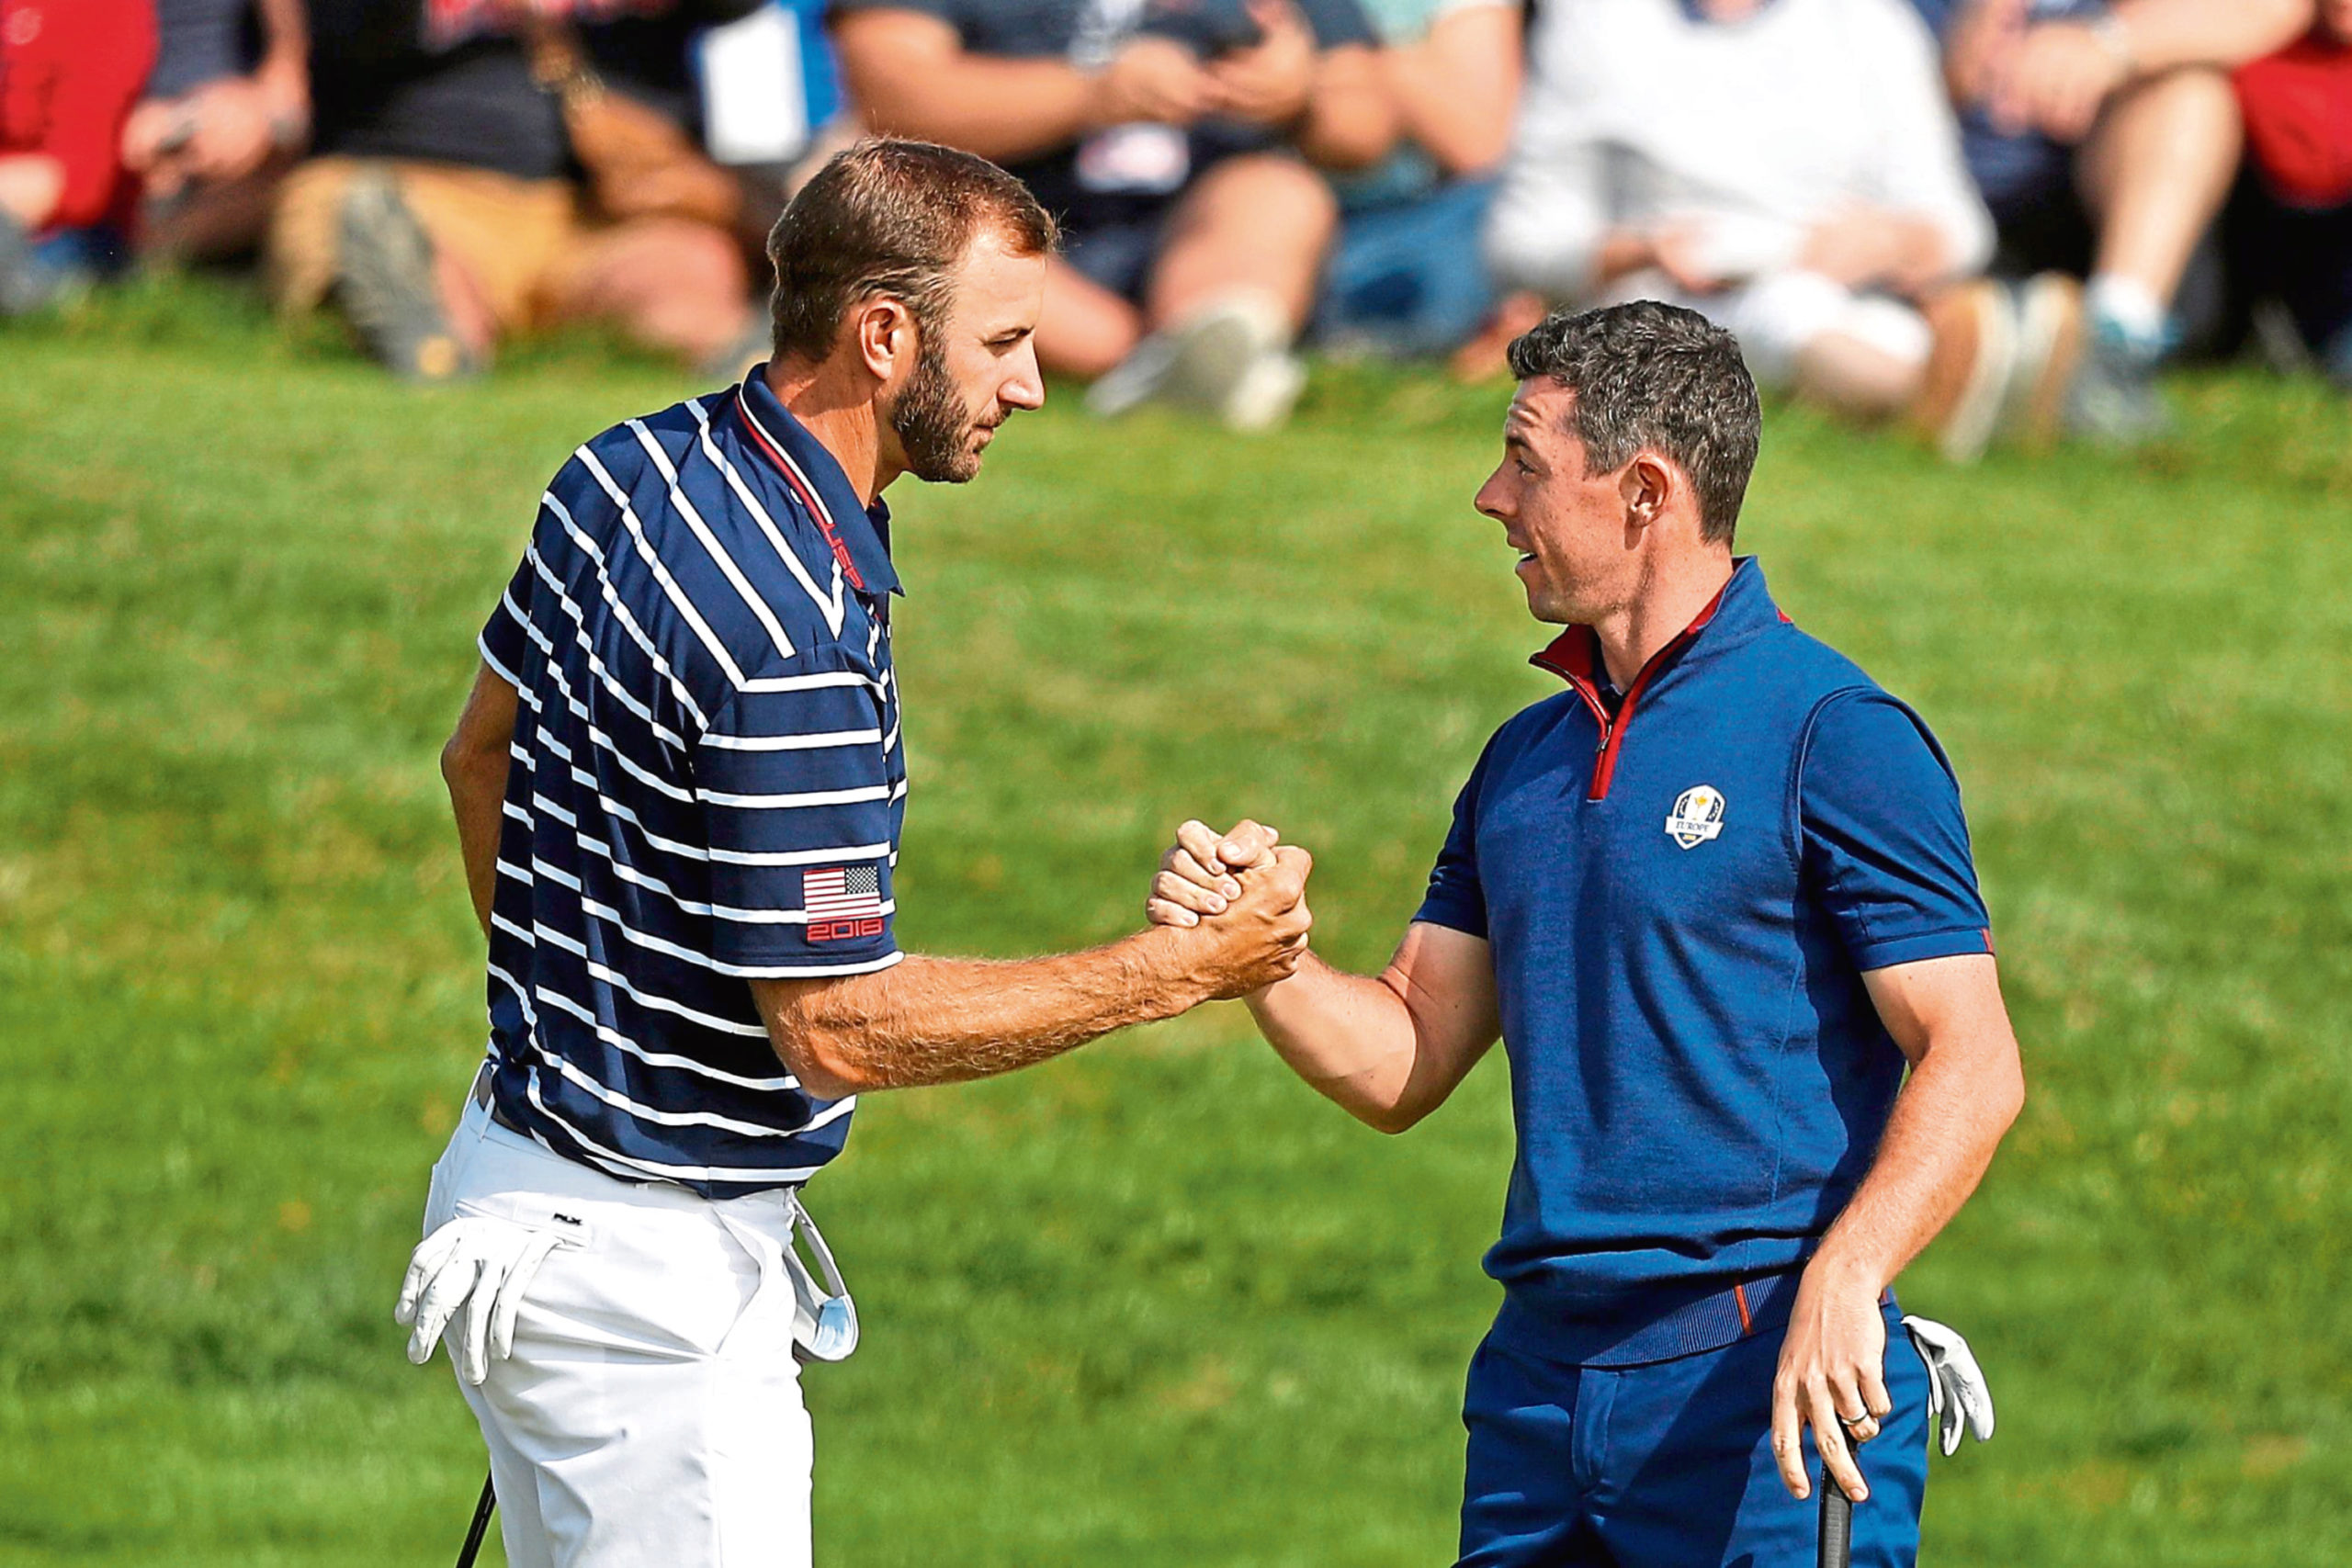 Mandatory Credit: Photo by Alastair Grant/AP/Shutterstock (10634055a)
Dustin Johnson left, and Rory McIlroy shake hands on 16th green at the end of a fourball match on the opening day of the 42nd Ryder Cup in Saint-Quentin-en-Yvelines, outside Paris, France. Johnson and McIlroy headline a $3 million charity match for COVID-19 relief that will mark the first live golf on television since the pandemic shut down sports worldwide. The May 17 match will be played at Seminole Golf Club in South Florida
Seminole Match Golf, Saint-Quentin-en-Yvelines, France - 28 Sep 2018